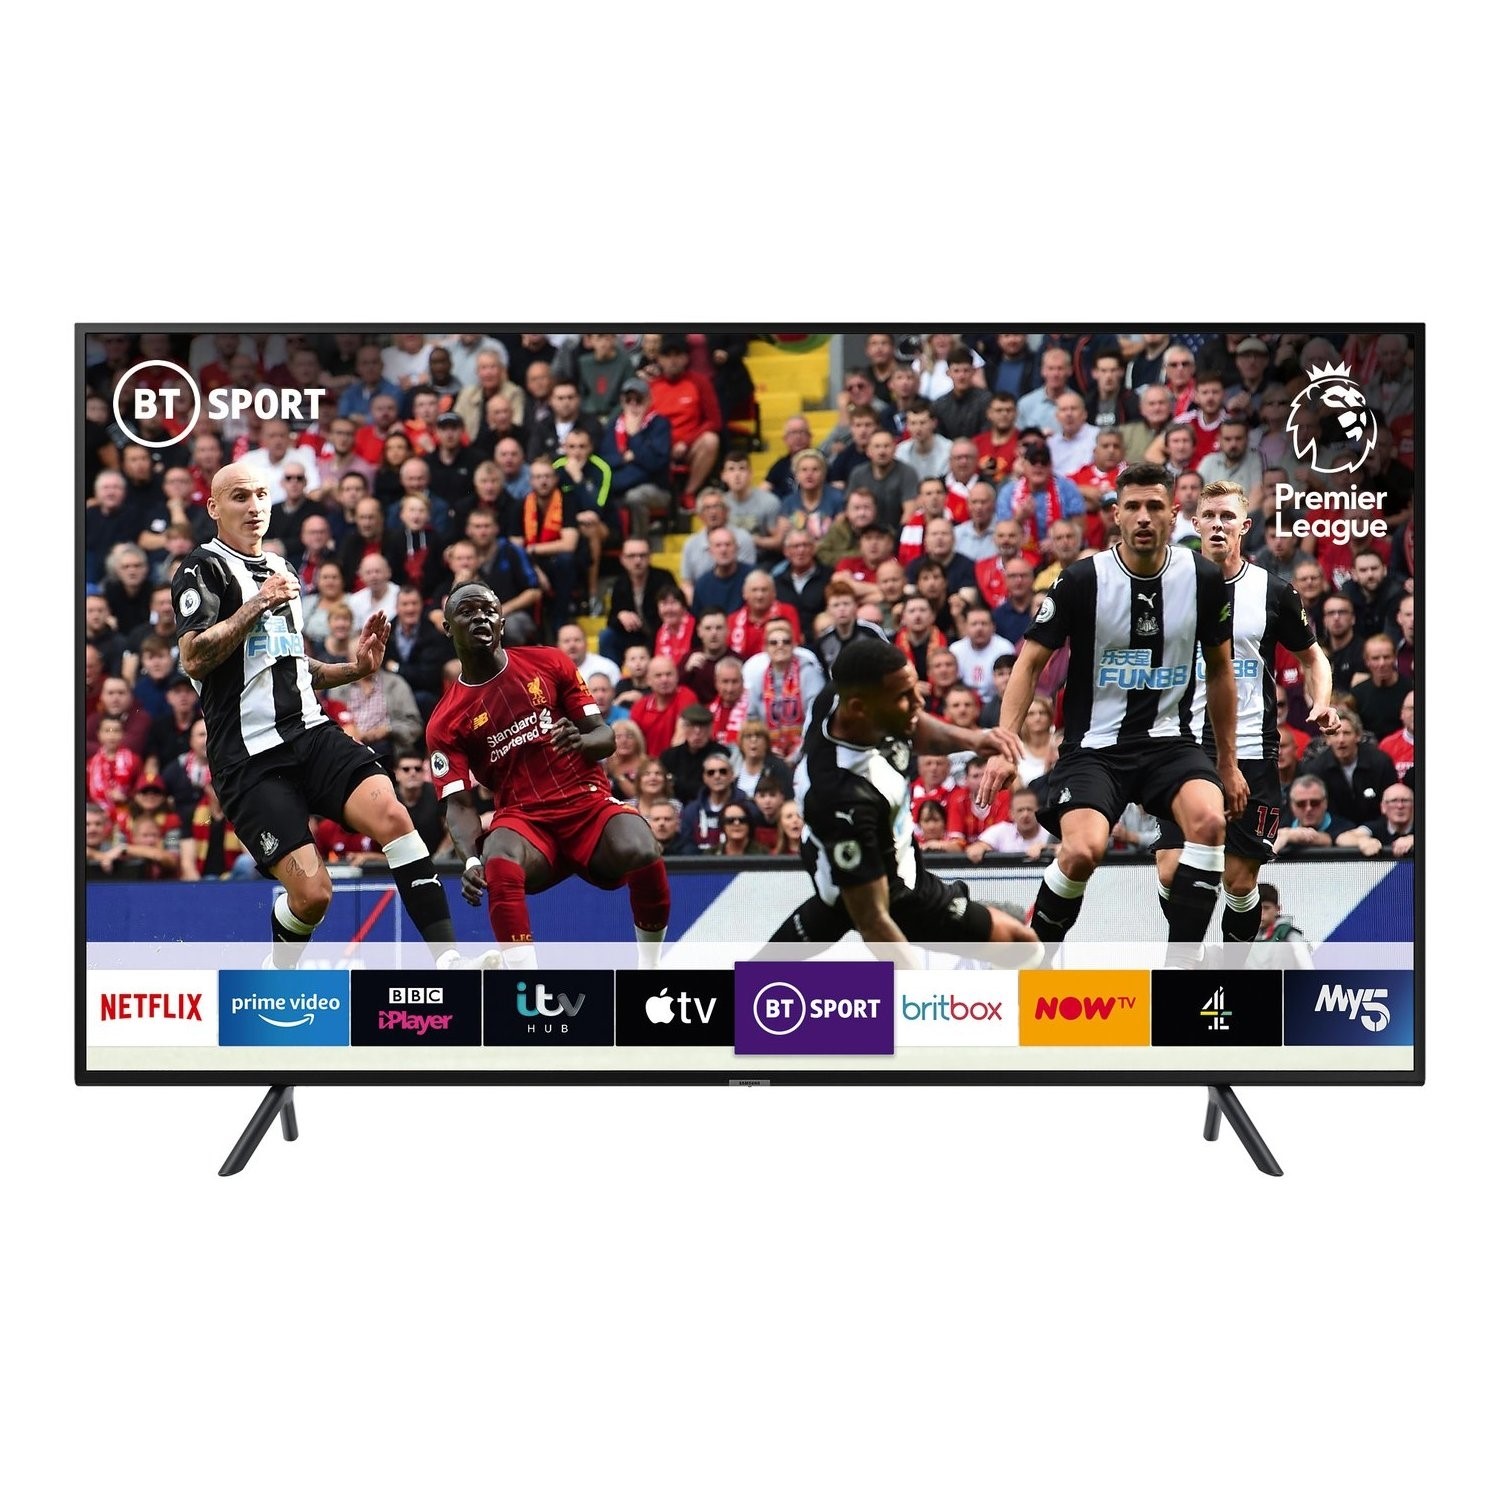 LG 43UM7000PLA (2019) LED HDR 4K Ultra HD Smart TV, 43 with Freeview Play/Freesat HD, Black